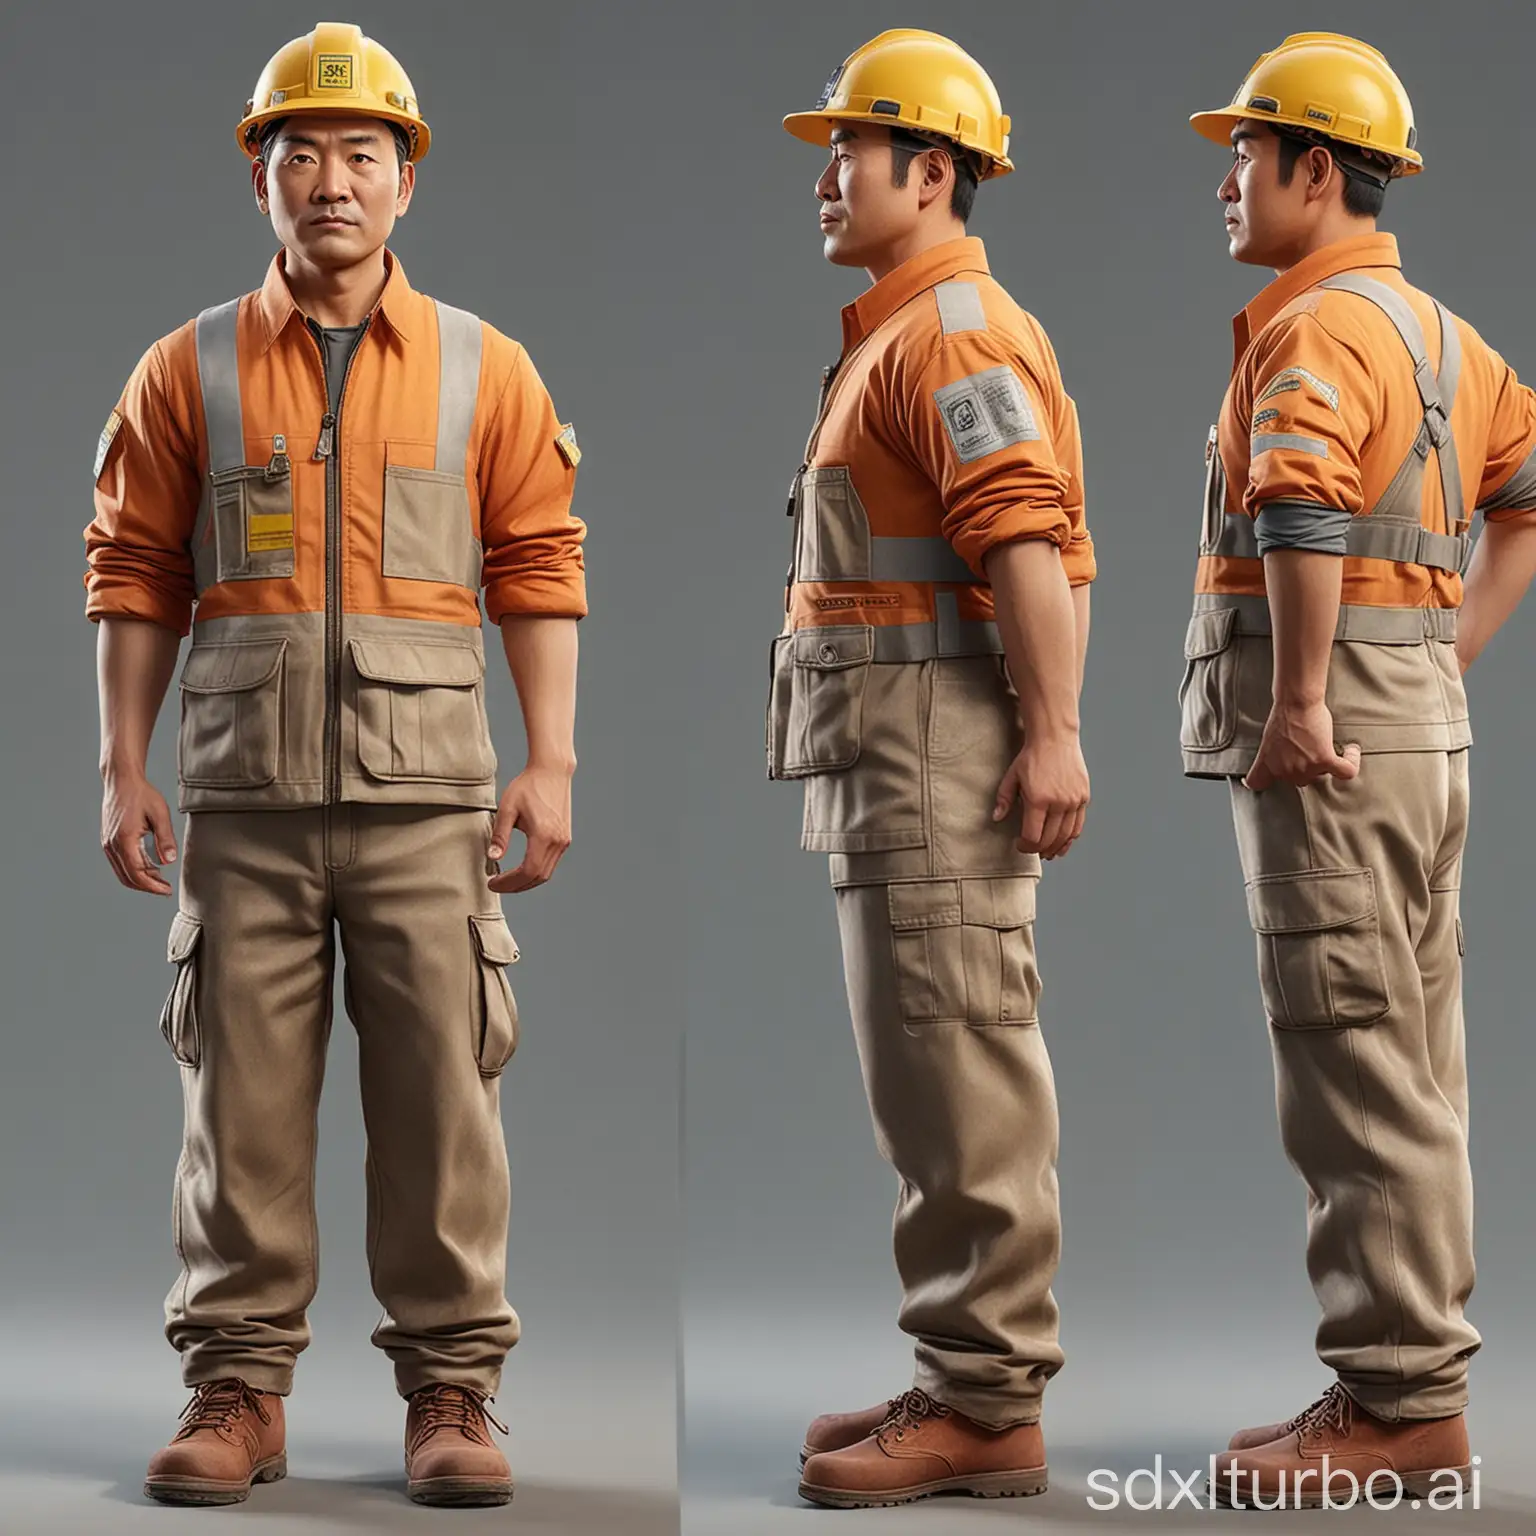 Please design for me a digital character of a Third Line Construction Worker, Chinese, male, with age and attire that matches the image of China's 1970s Third Line Construction, preferably with a front-facing and a side-facing image.